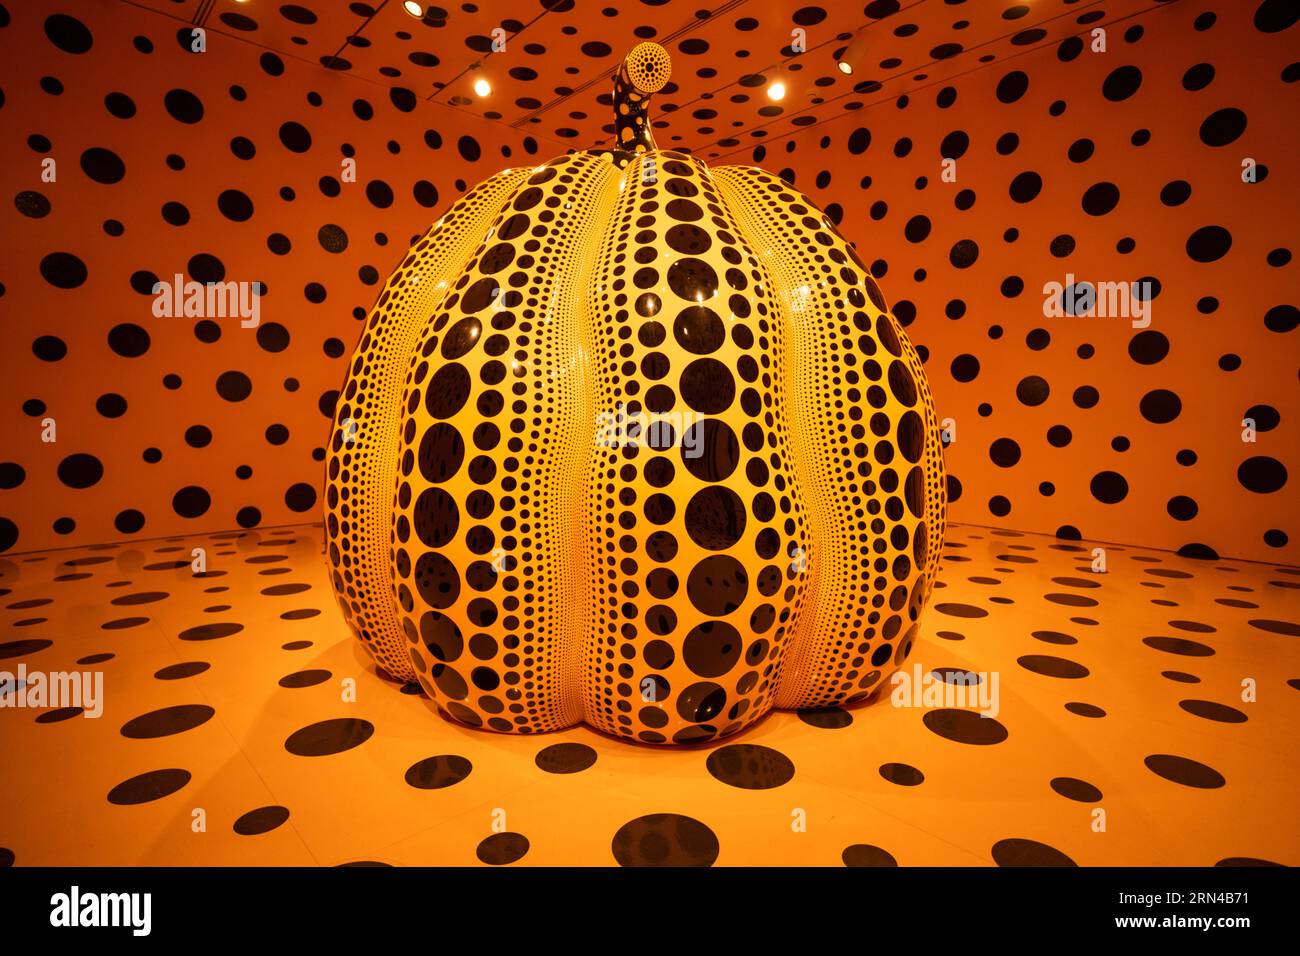 WASHINGTON DC — Pumpkin (2016). It's part of an exhibition titled One with Eternity, by Yayoi Kusama, on display at the Smithsonian Hirshhorn Museum in Washington DC. One with Eternity showcases the Hirshhorn’s permanent collection of works by Kusama, including two of her Infinity Mirror Rooms—her first and one of her most recent—that create a dazzling sensation of never-ending space. These transcendent rooms will be exhibited alongside an early painting; sculptures, including Pumpkin (2016) and Flowers—Overcoat (1964); and photographs of the artist. This exhibition honors Kusama’s distinctive Stock Photo